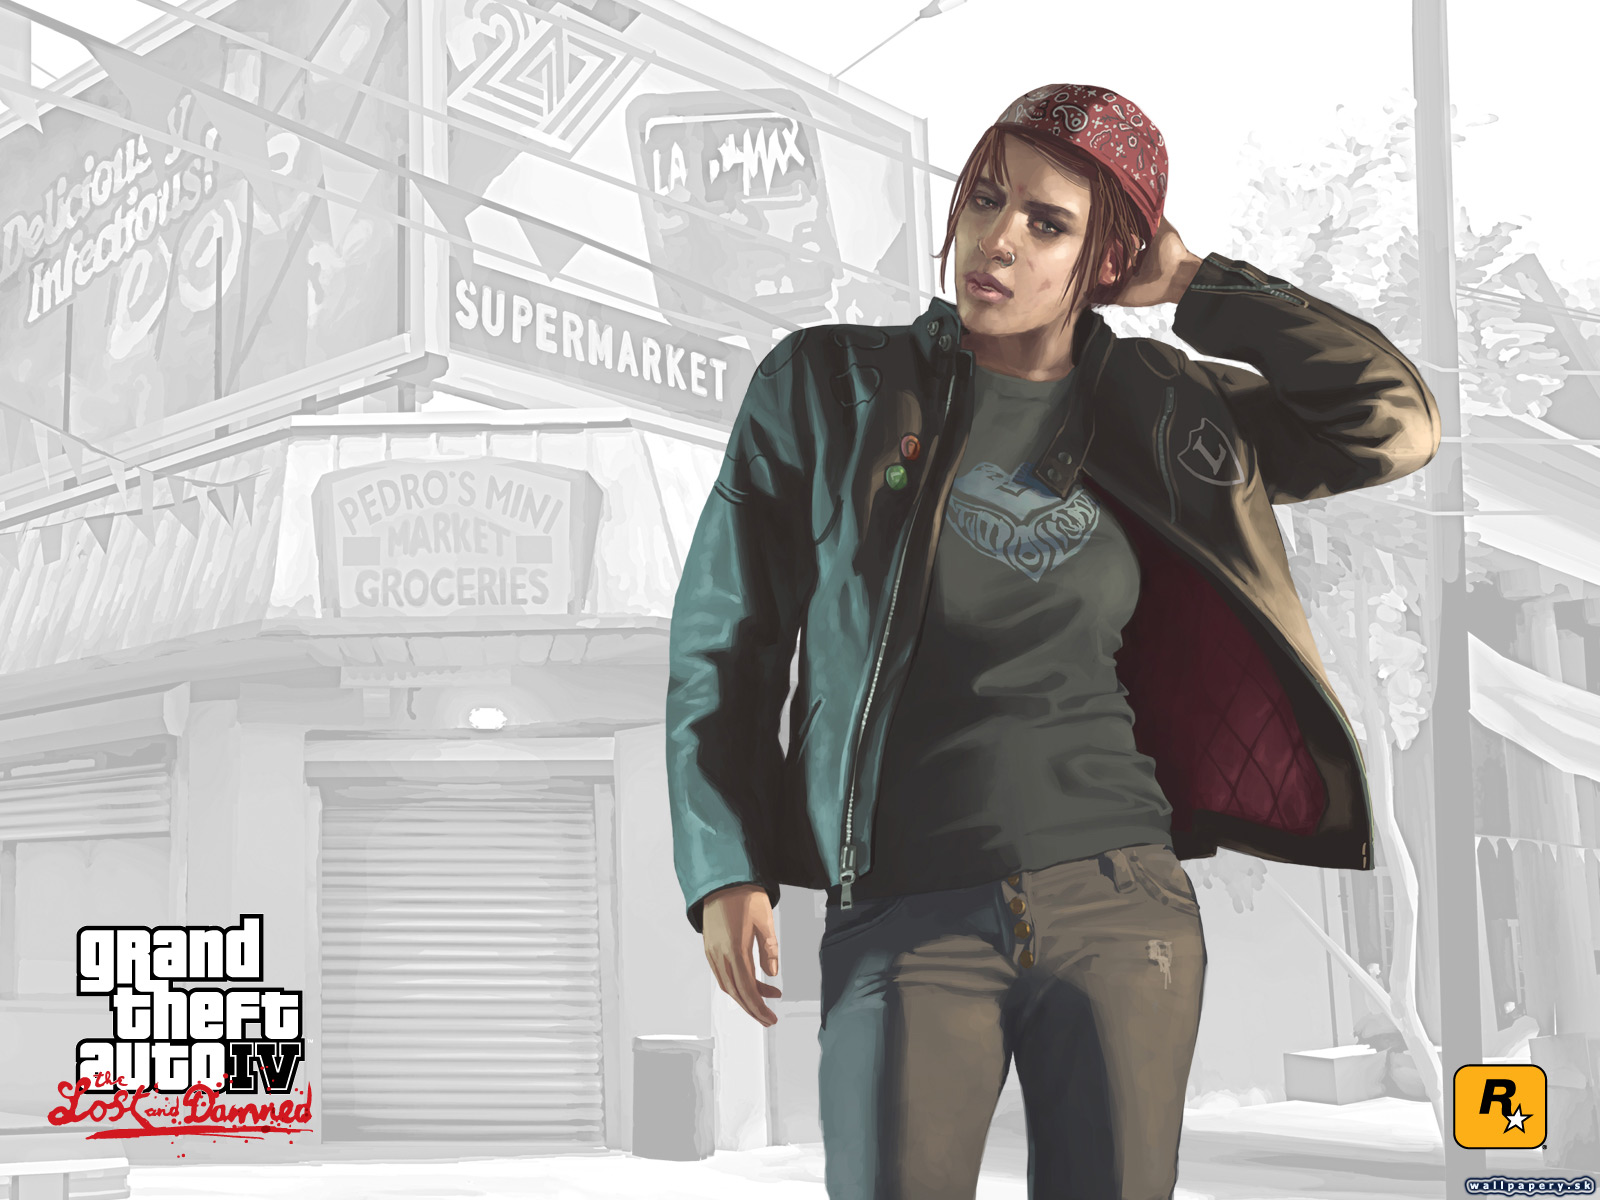 Grand Theft Auto IV: The Lost and Damned - wallpaper 4